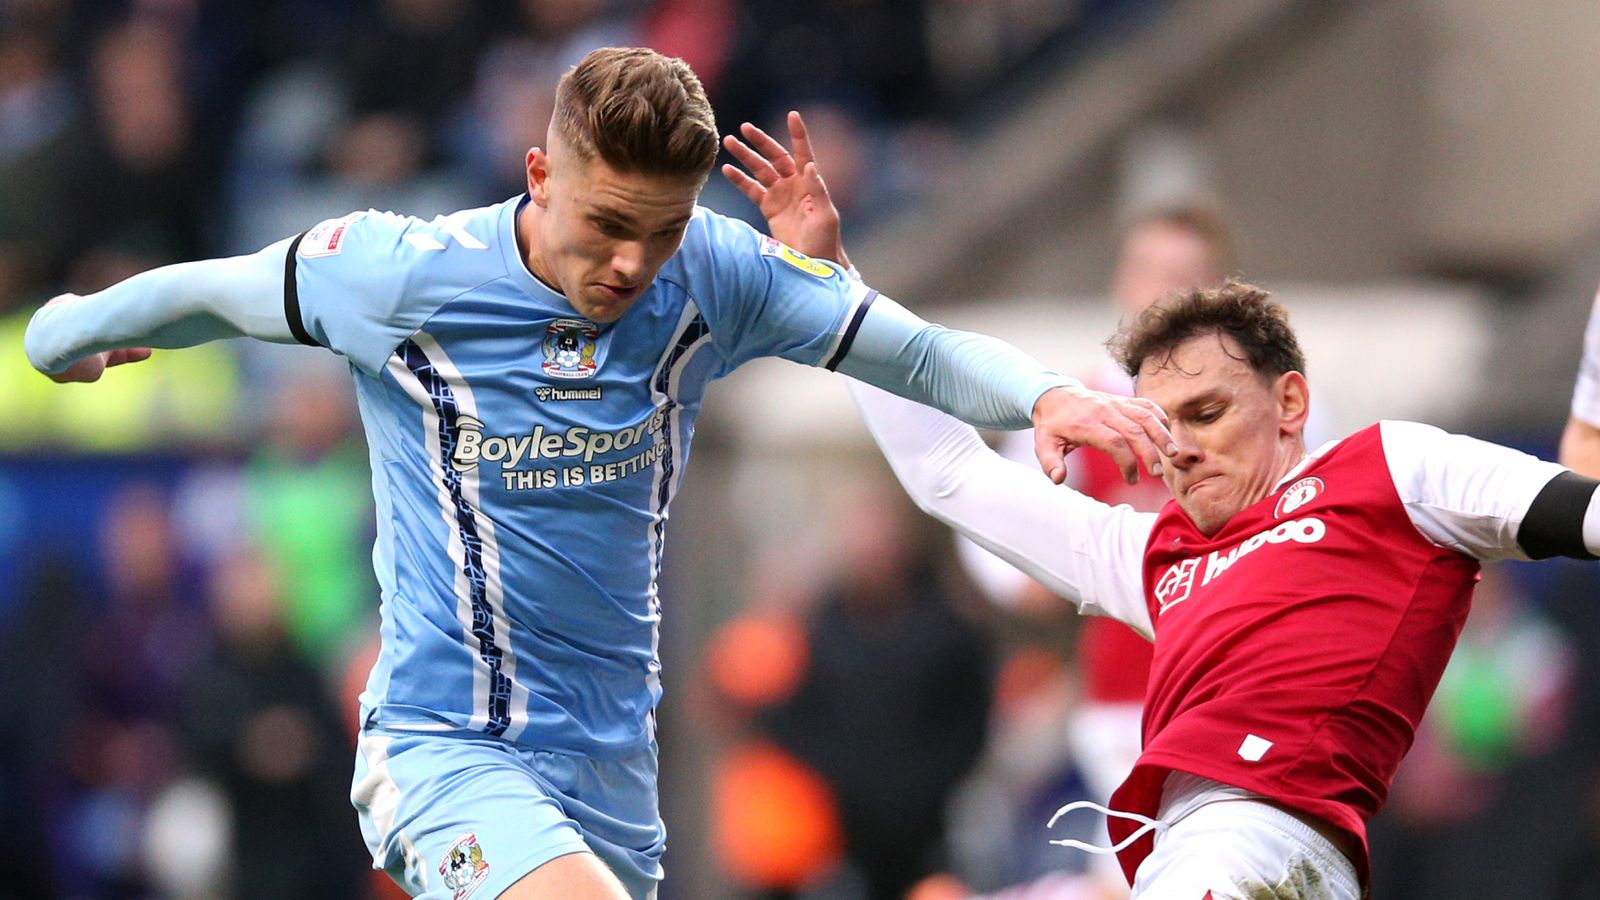 Watch Bristol City vs Coventry City Live Stream, How To Watch Championship Round 12 Live TV Info Worldwide